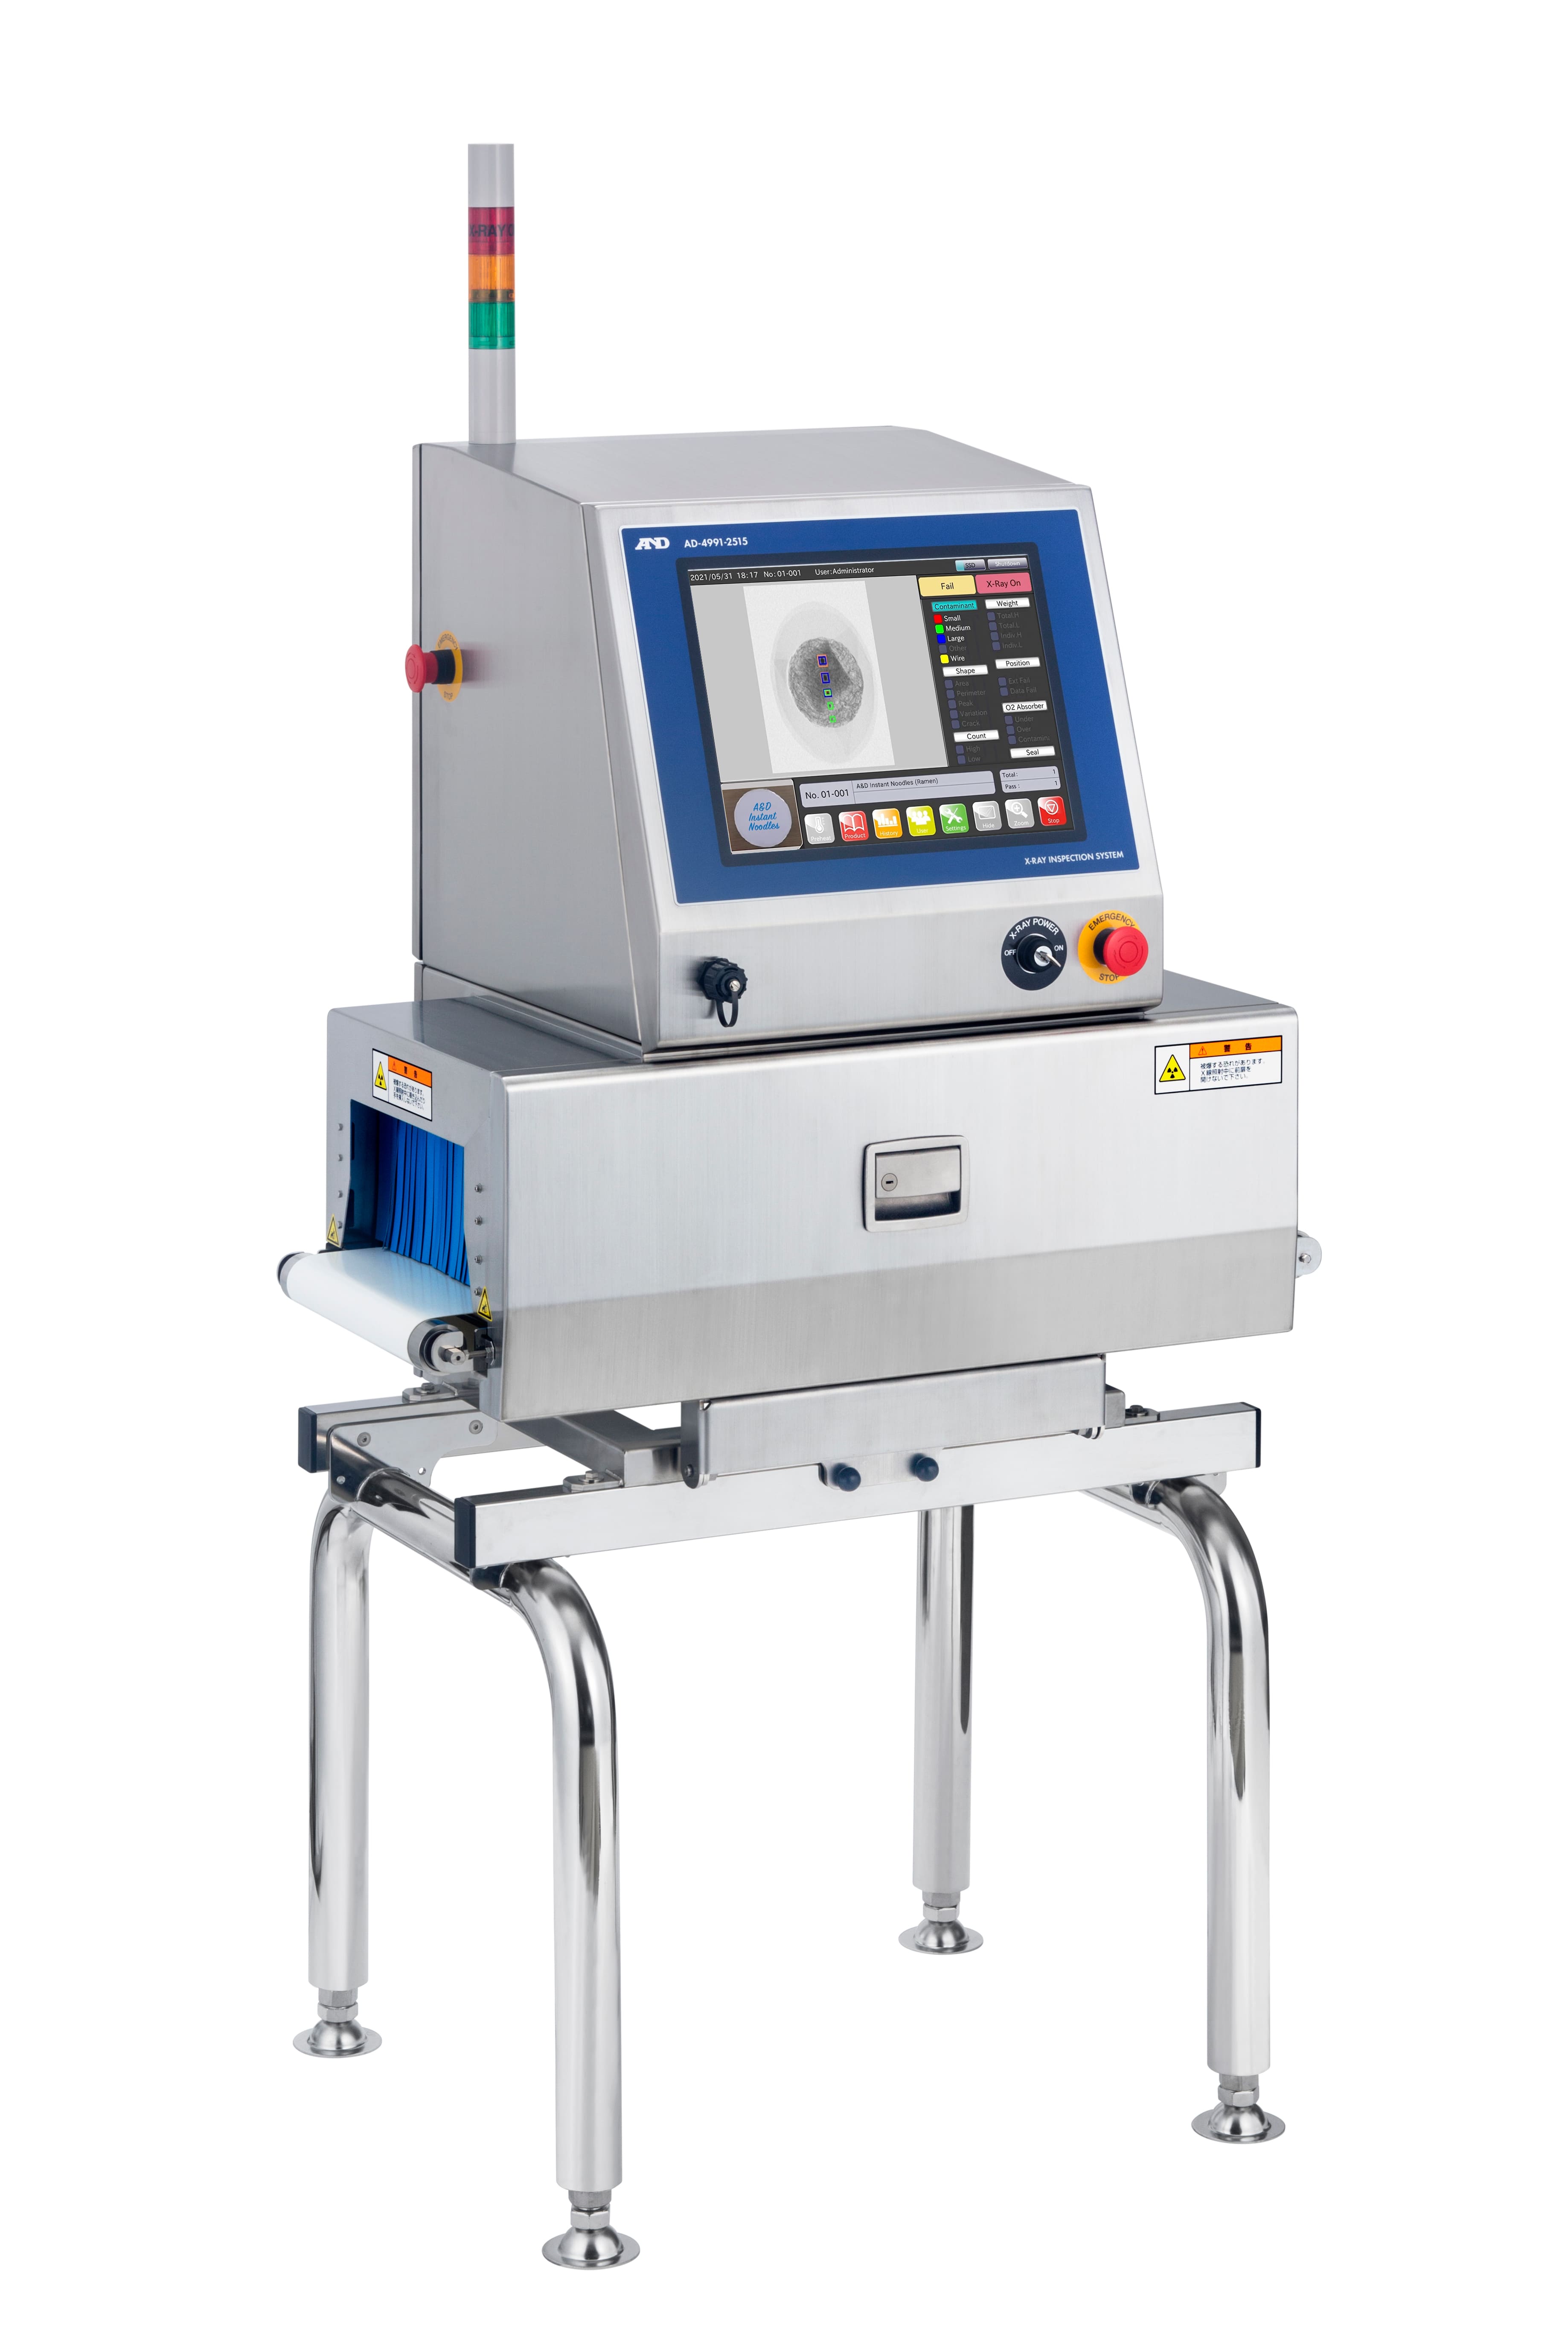 AD-4991 | X-ray Inspection Systems | Inspection Systems | Products